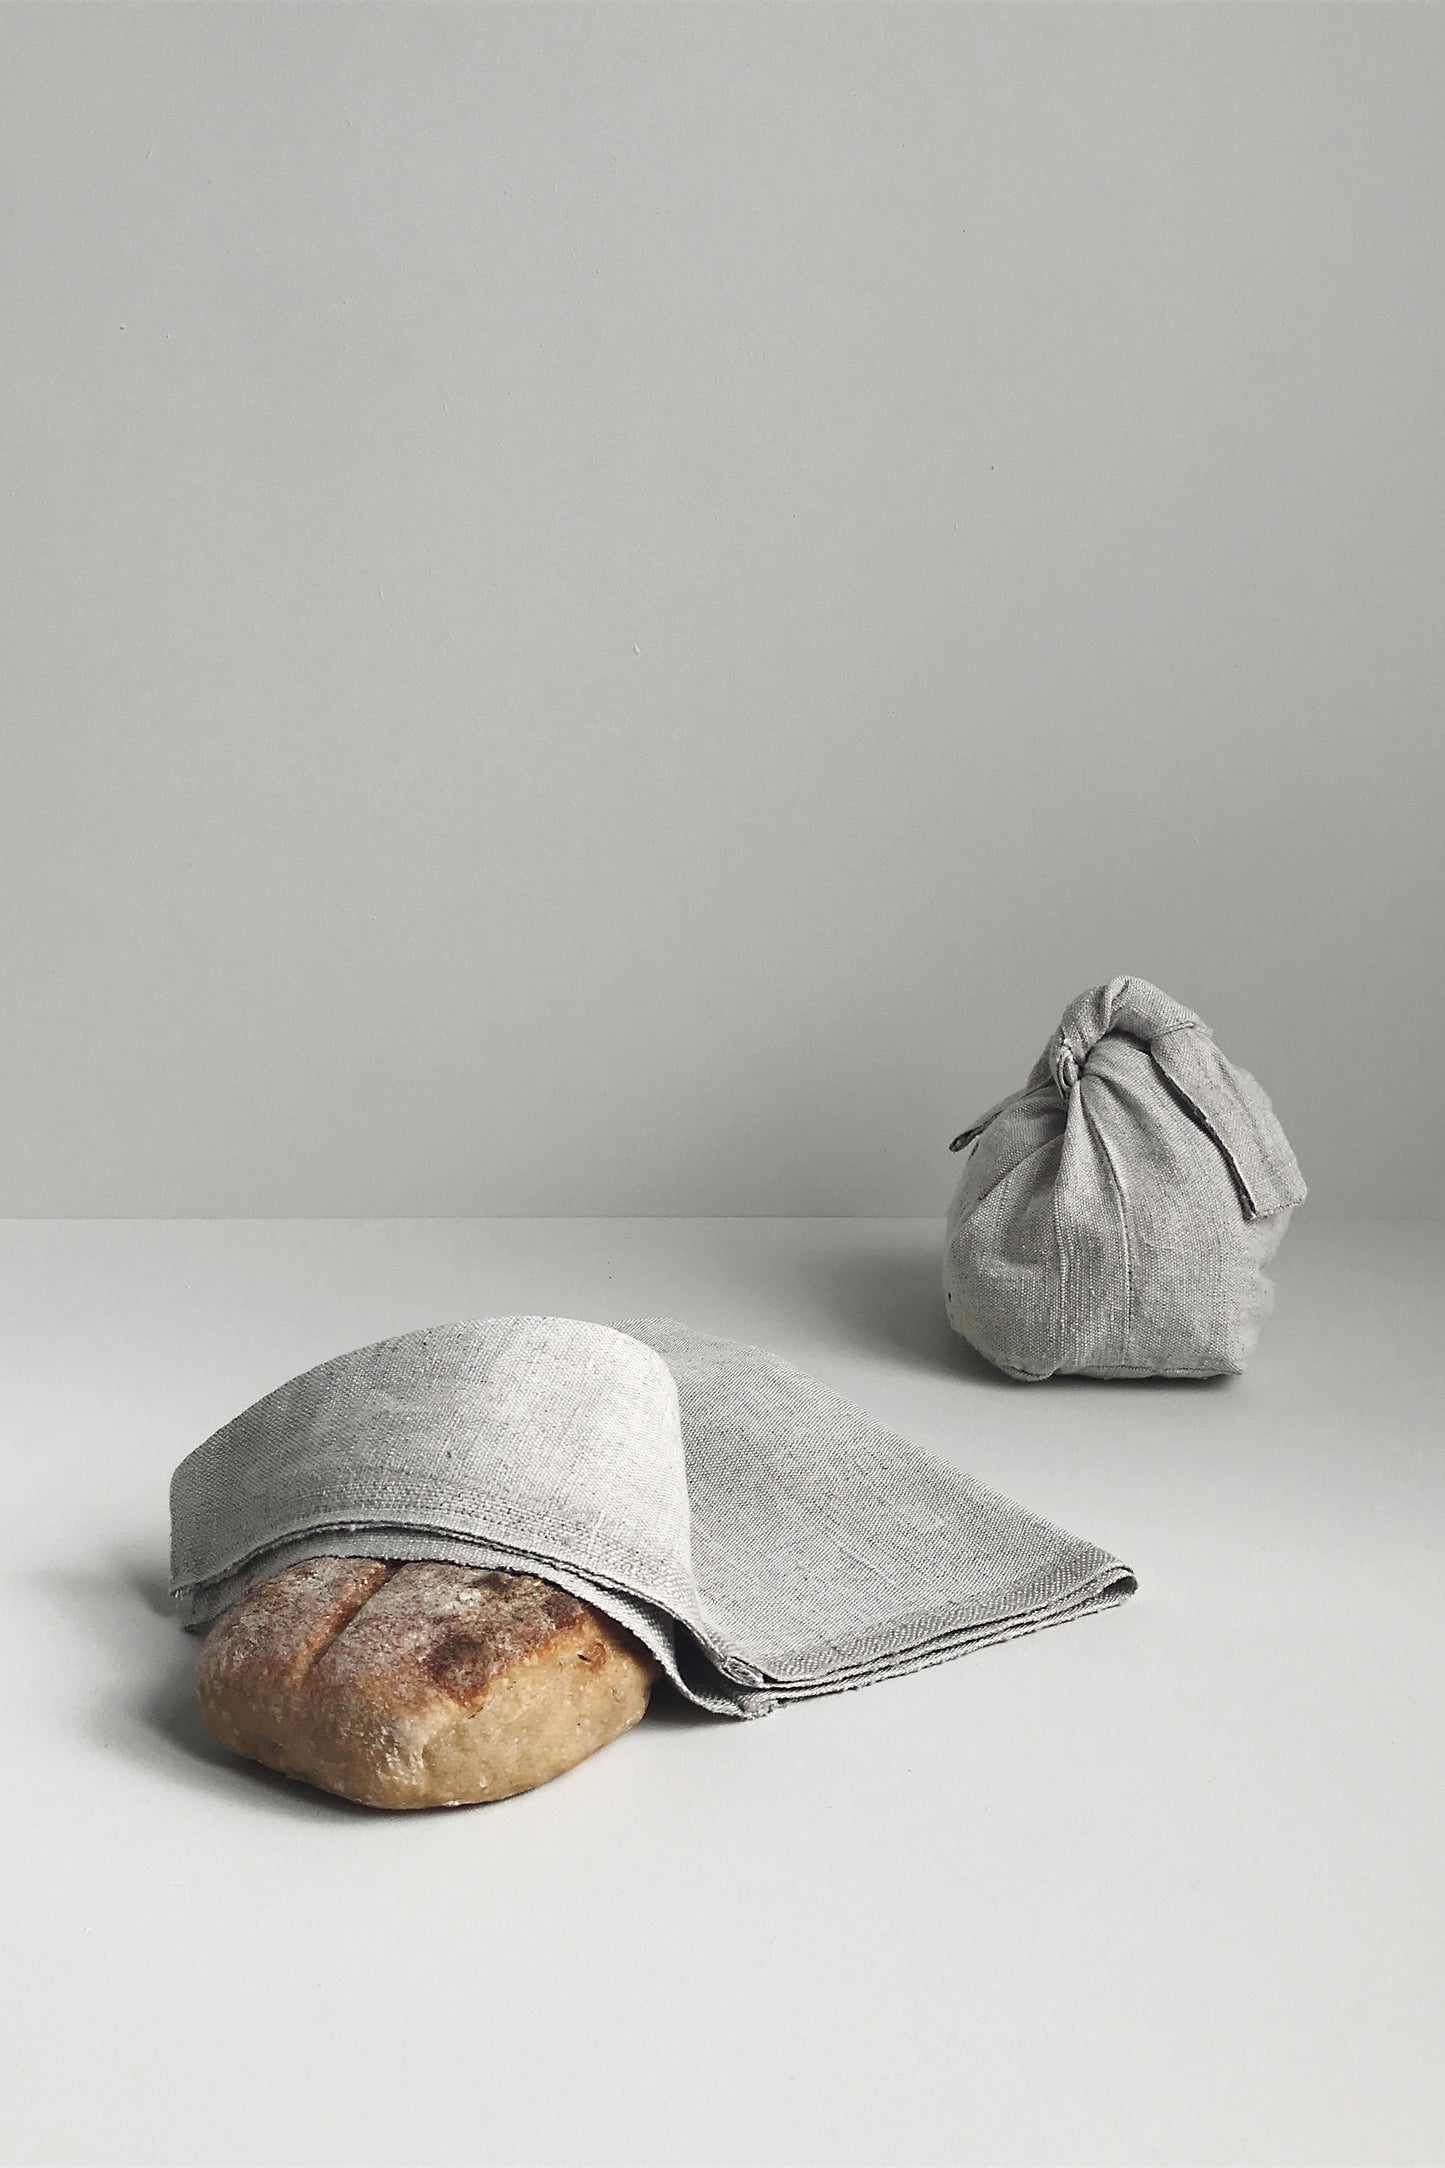 Linen storage bags by Bonni Bonne, here used as bread basket